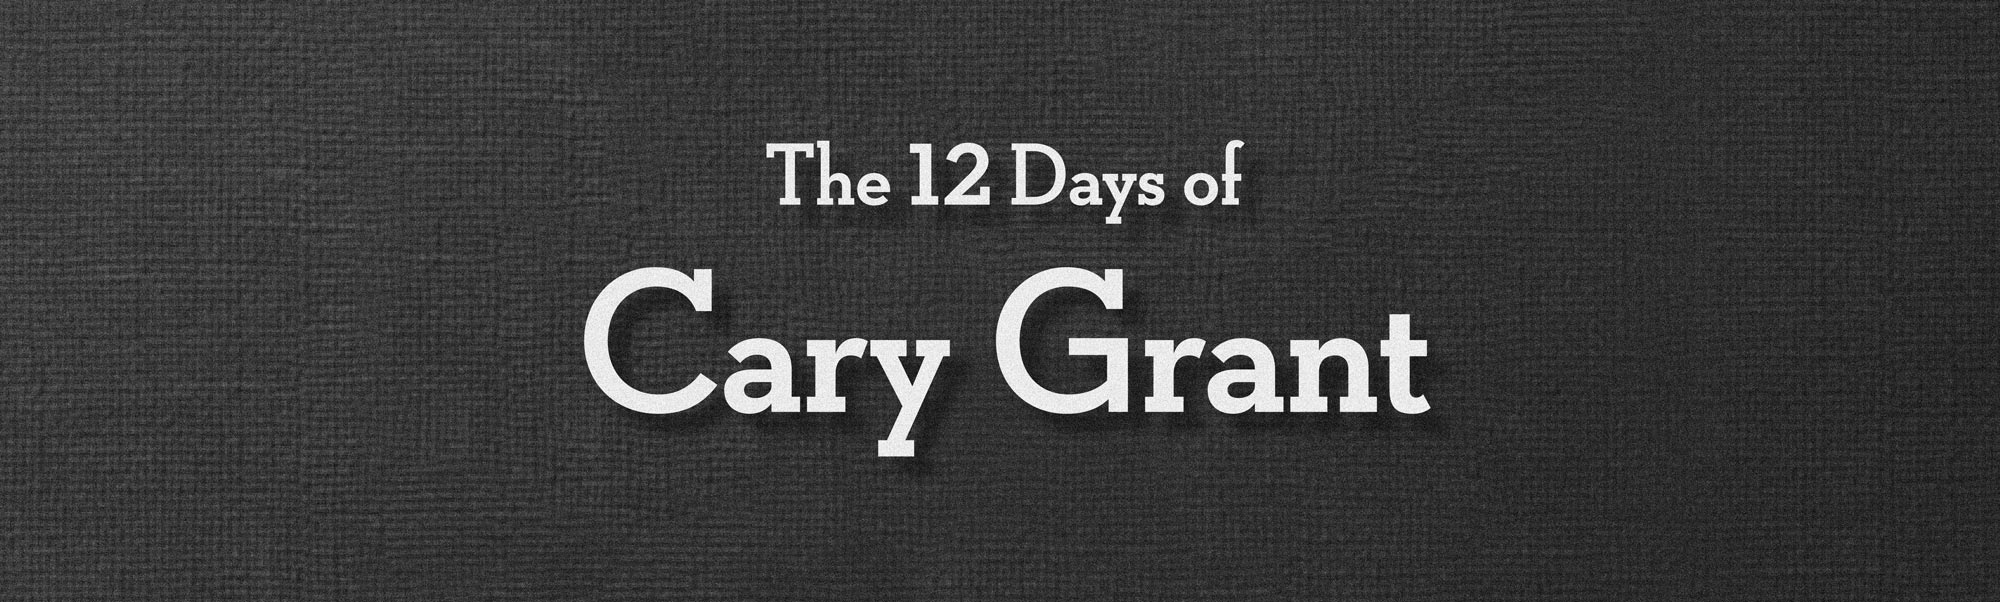 Merry Cary, 2021 – The Twelve Days of Cary Grant